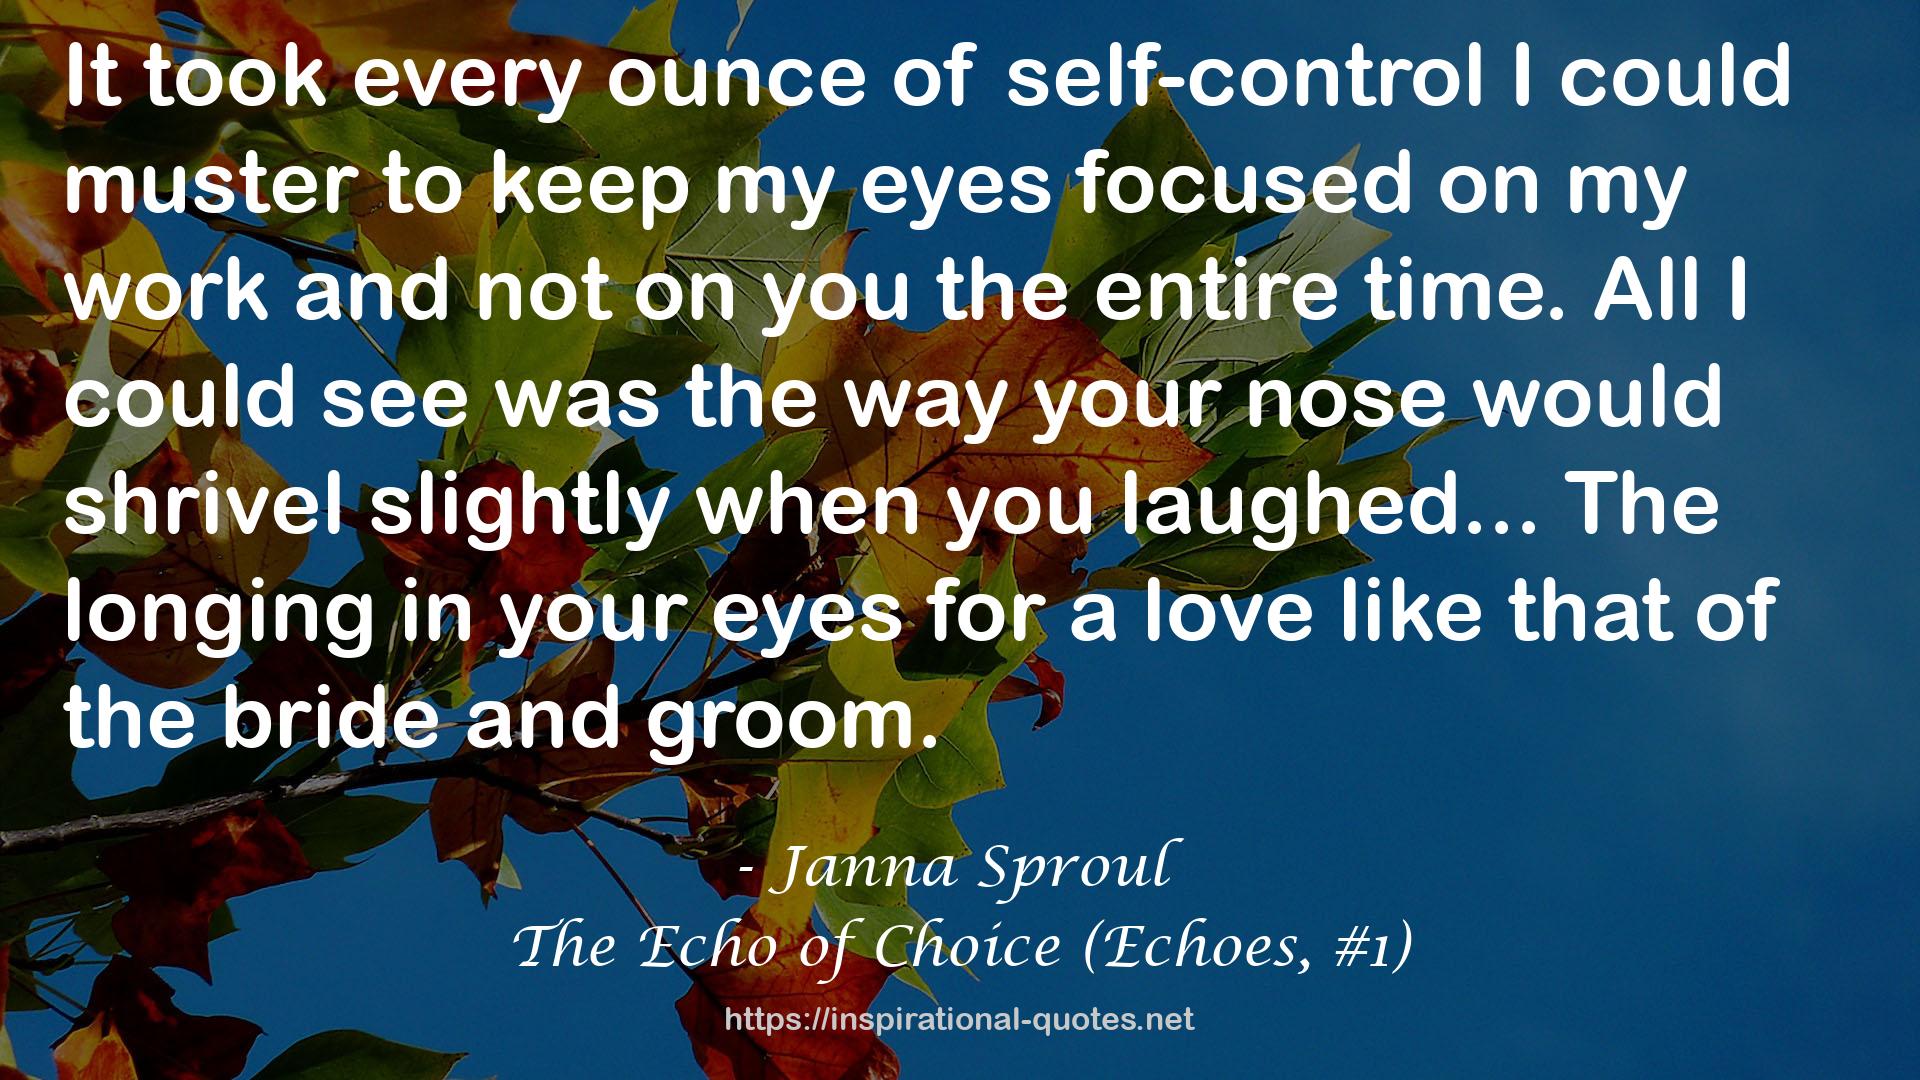 The Echo of Choice (Echoes, #1) QUOTES